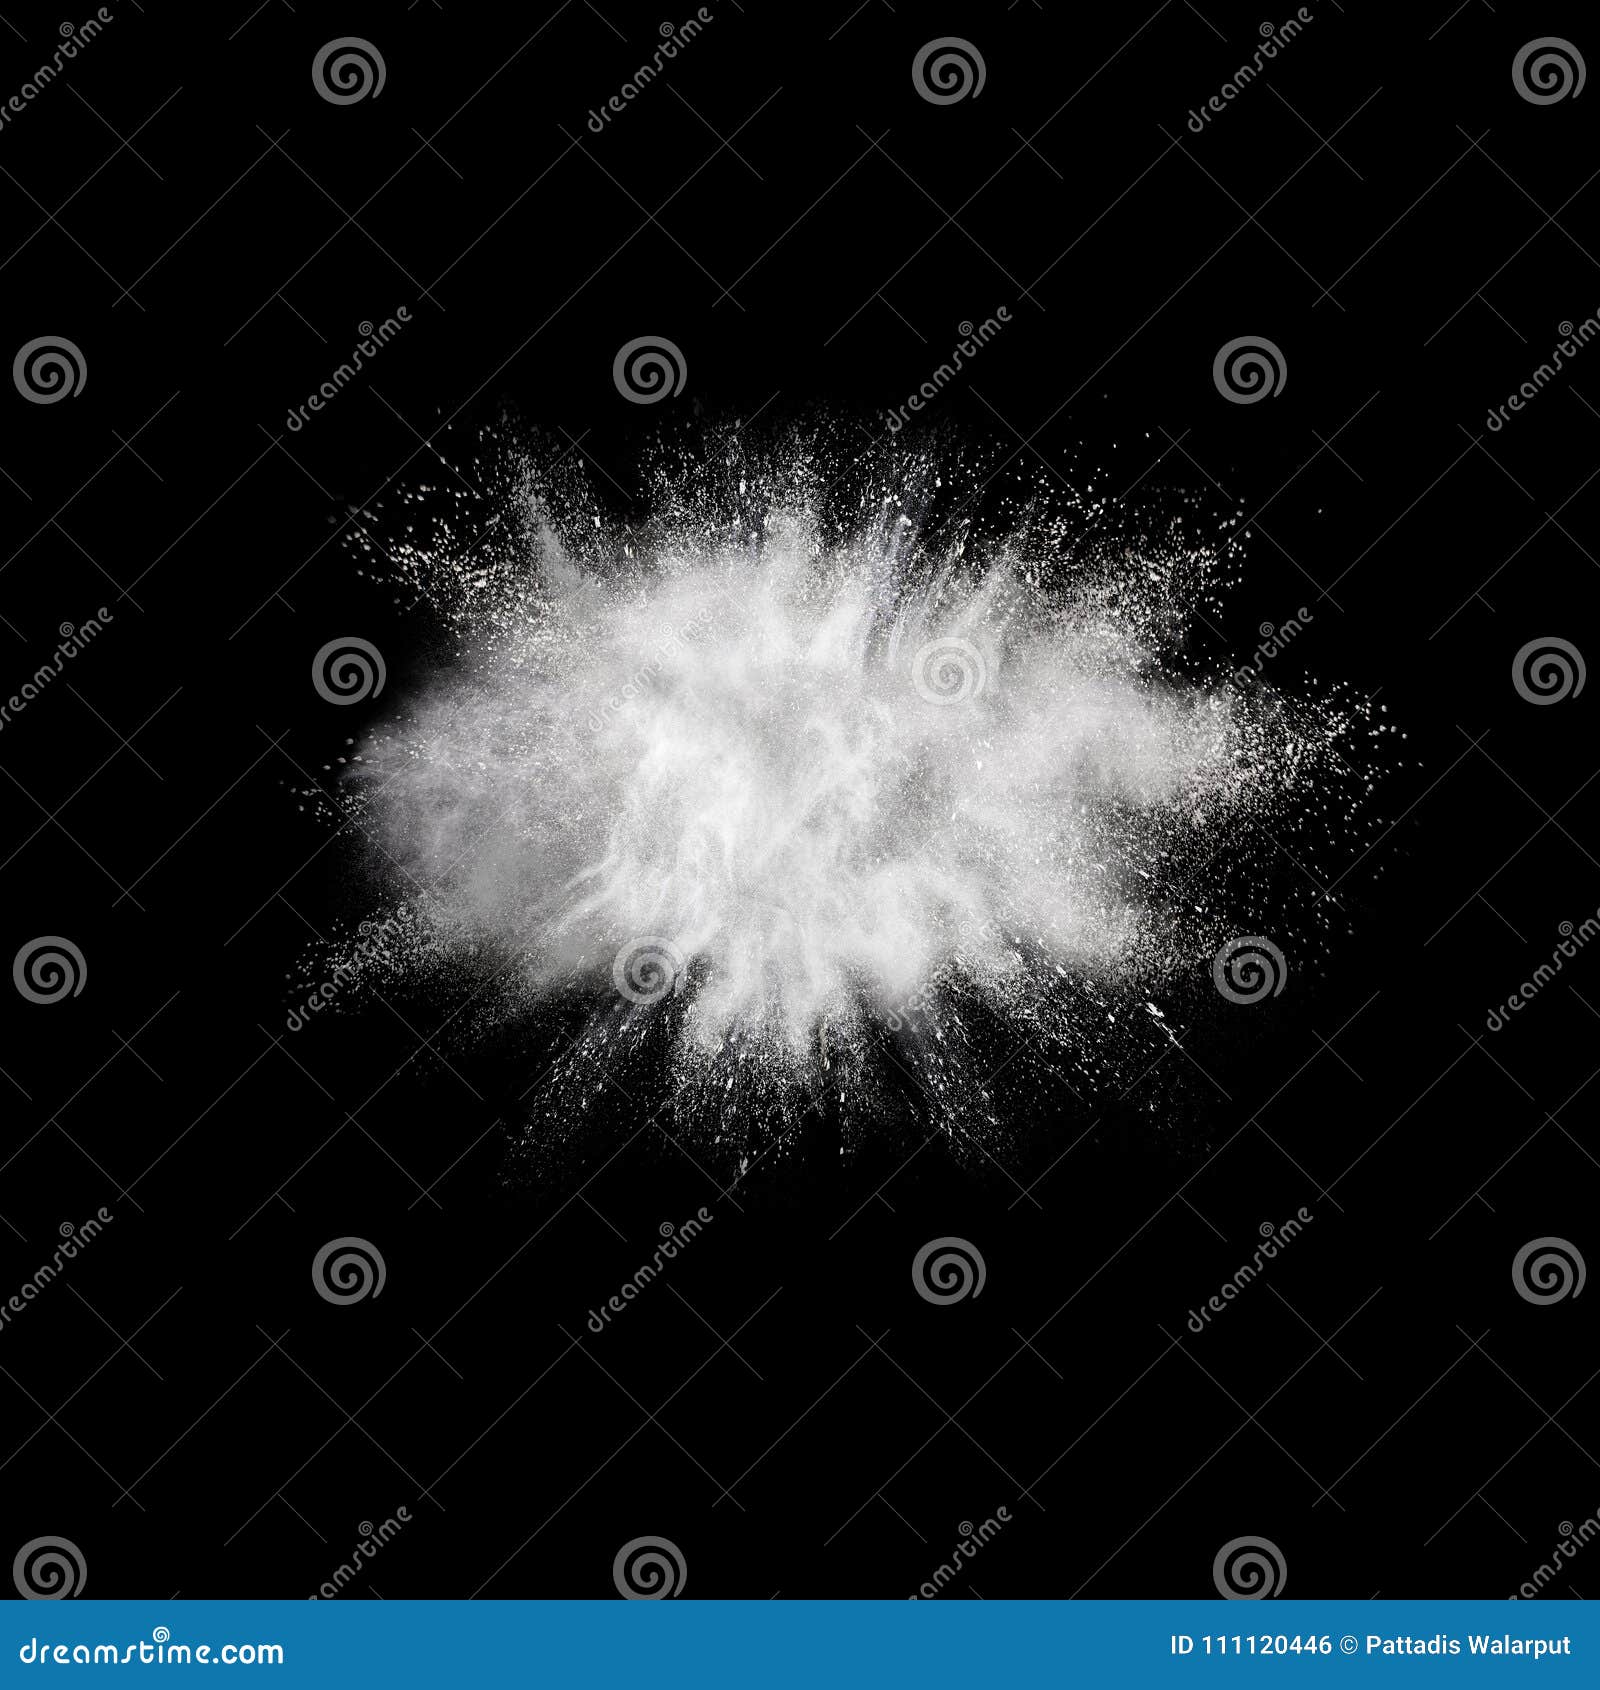 launched white particle splash on black background.